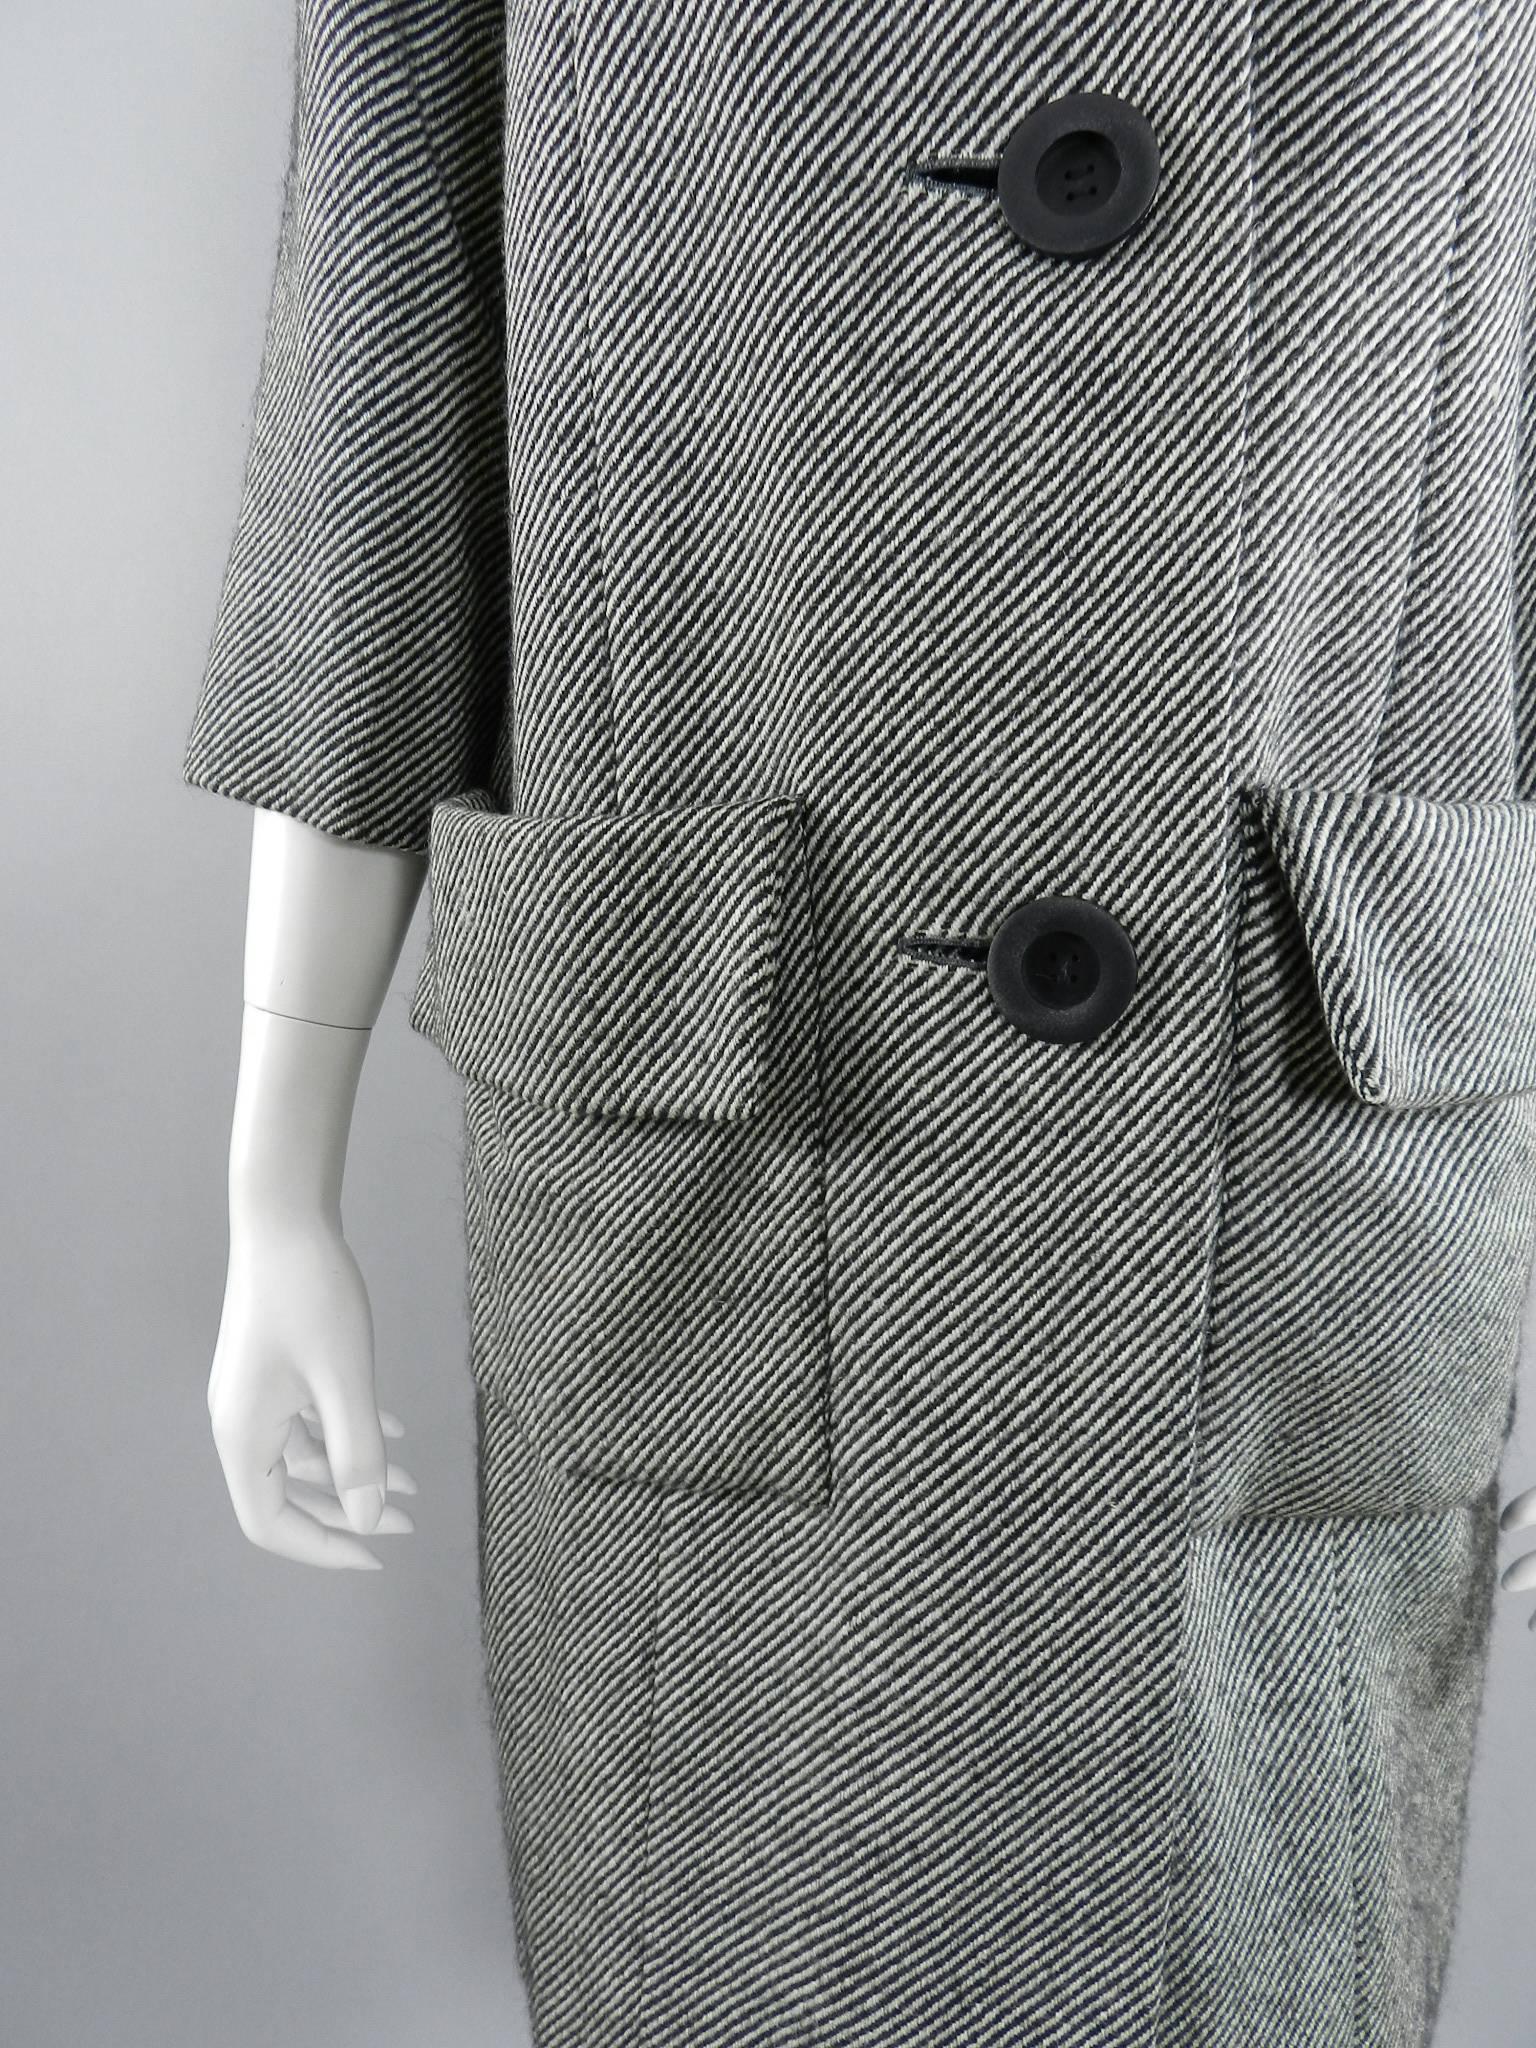 Pierre Cardin Jeunesse Black and White Tweed Wool Skirt and Coat Set, 1960s  4